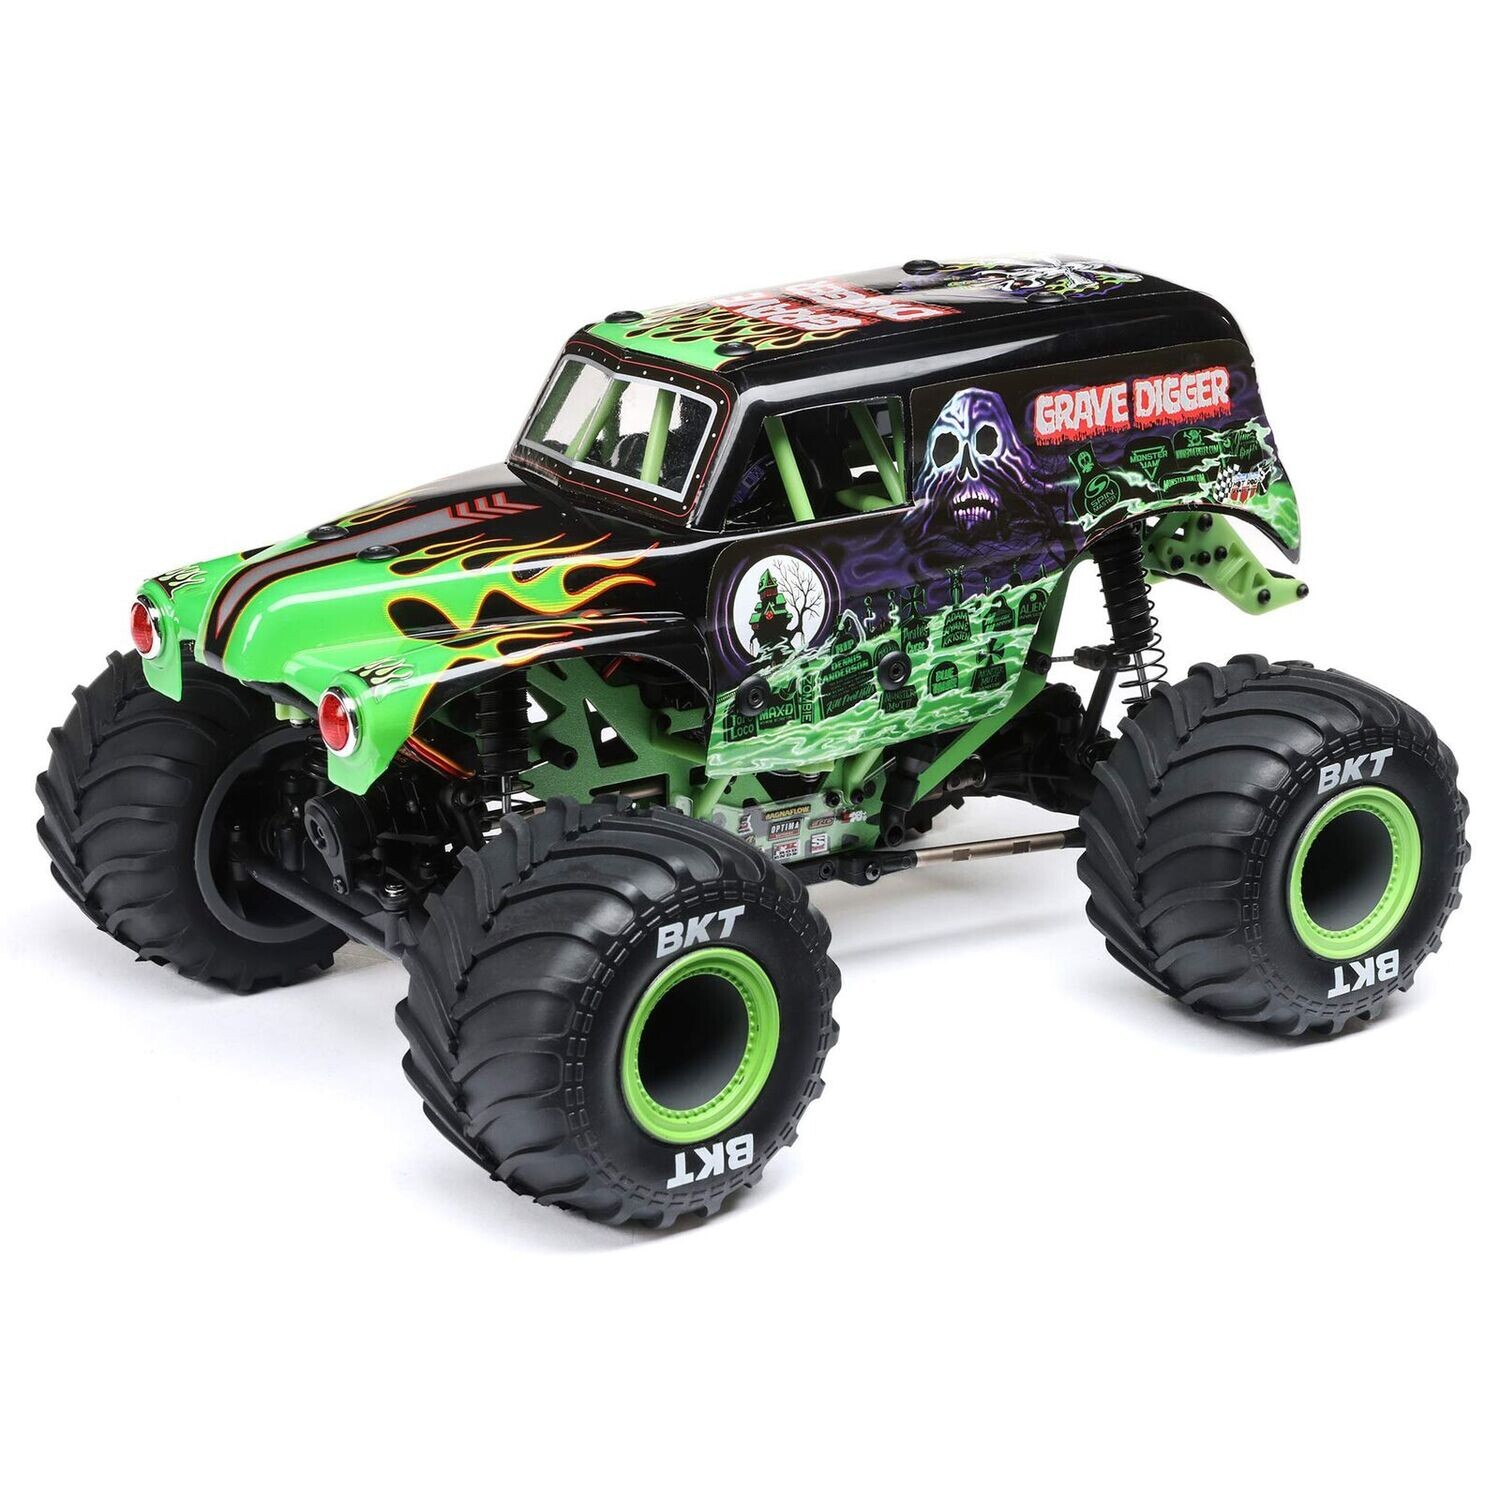 1/18 Losi Mini LMT 4WD Monster Truck Brushed RTD, Grave Digger